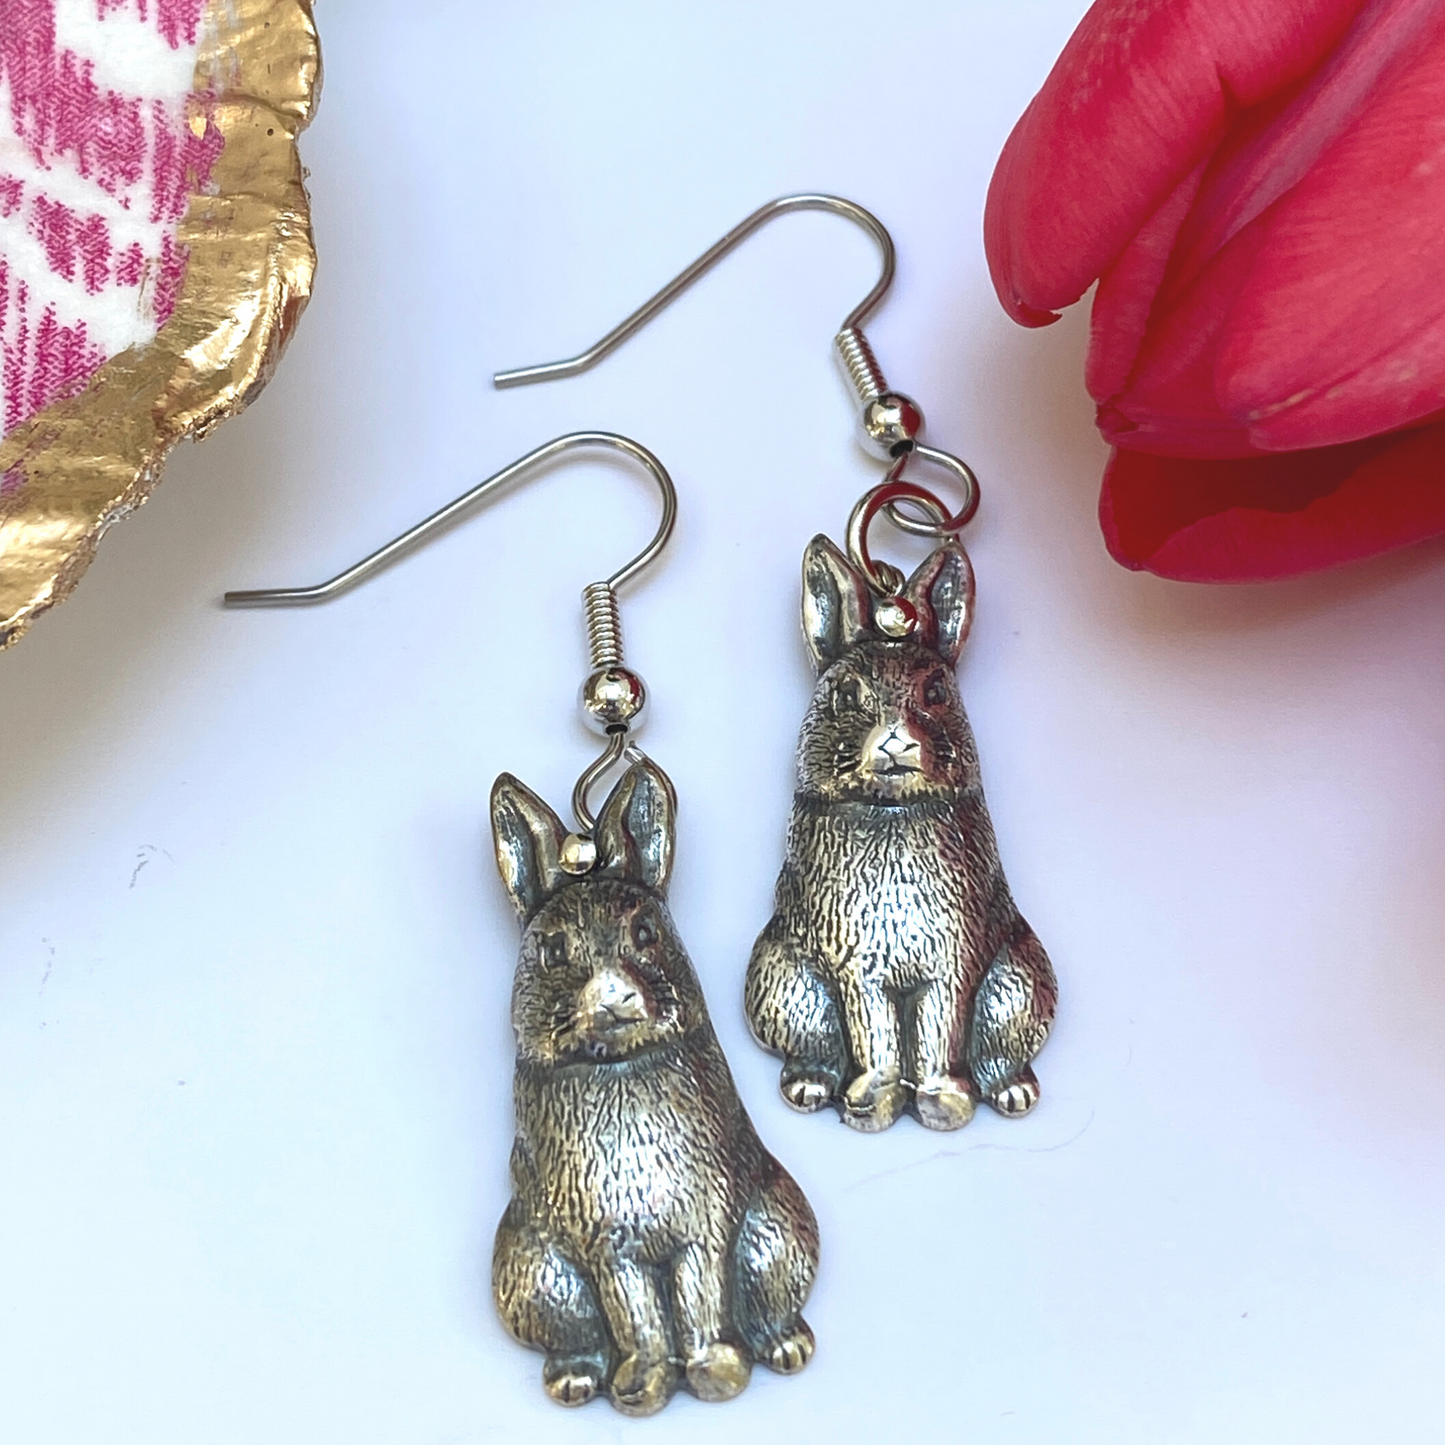 Bunny Gift, Earrings, Silver Bunny, French Ear Wire, Handmade, Vintage Finding